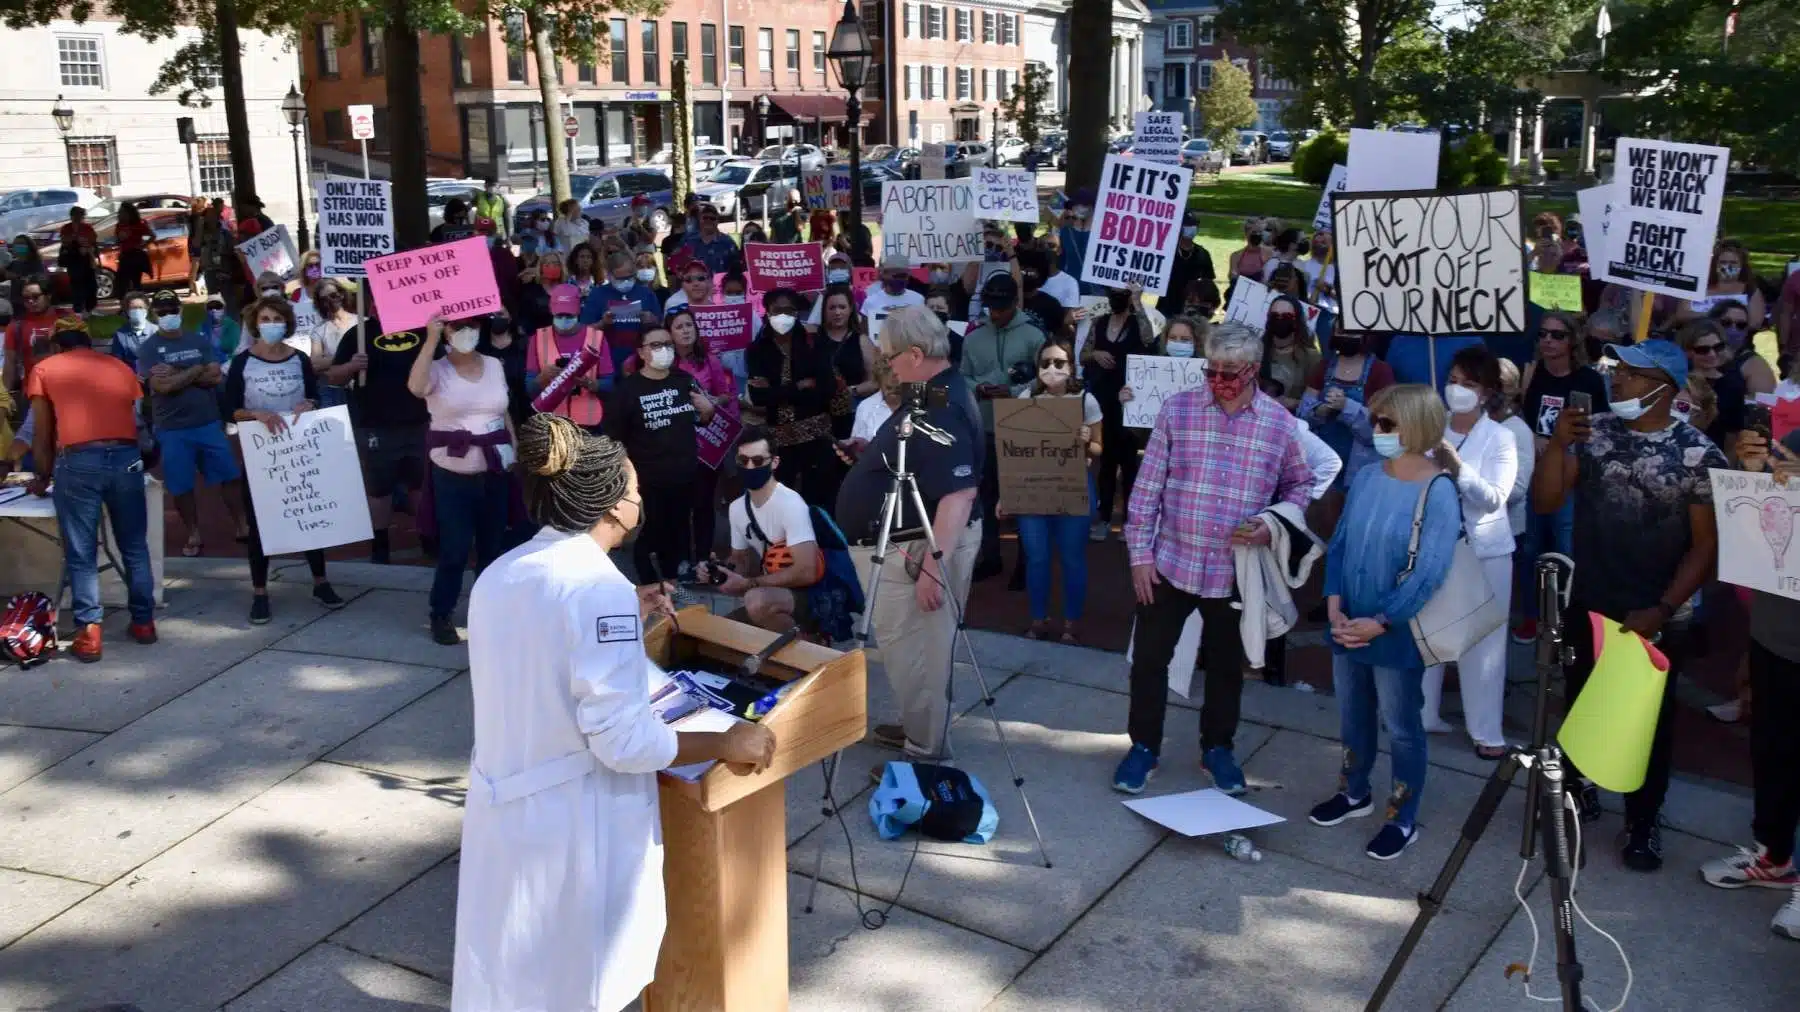 Rhode Island News: Video and photos from the Abortion Justice March and Rally